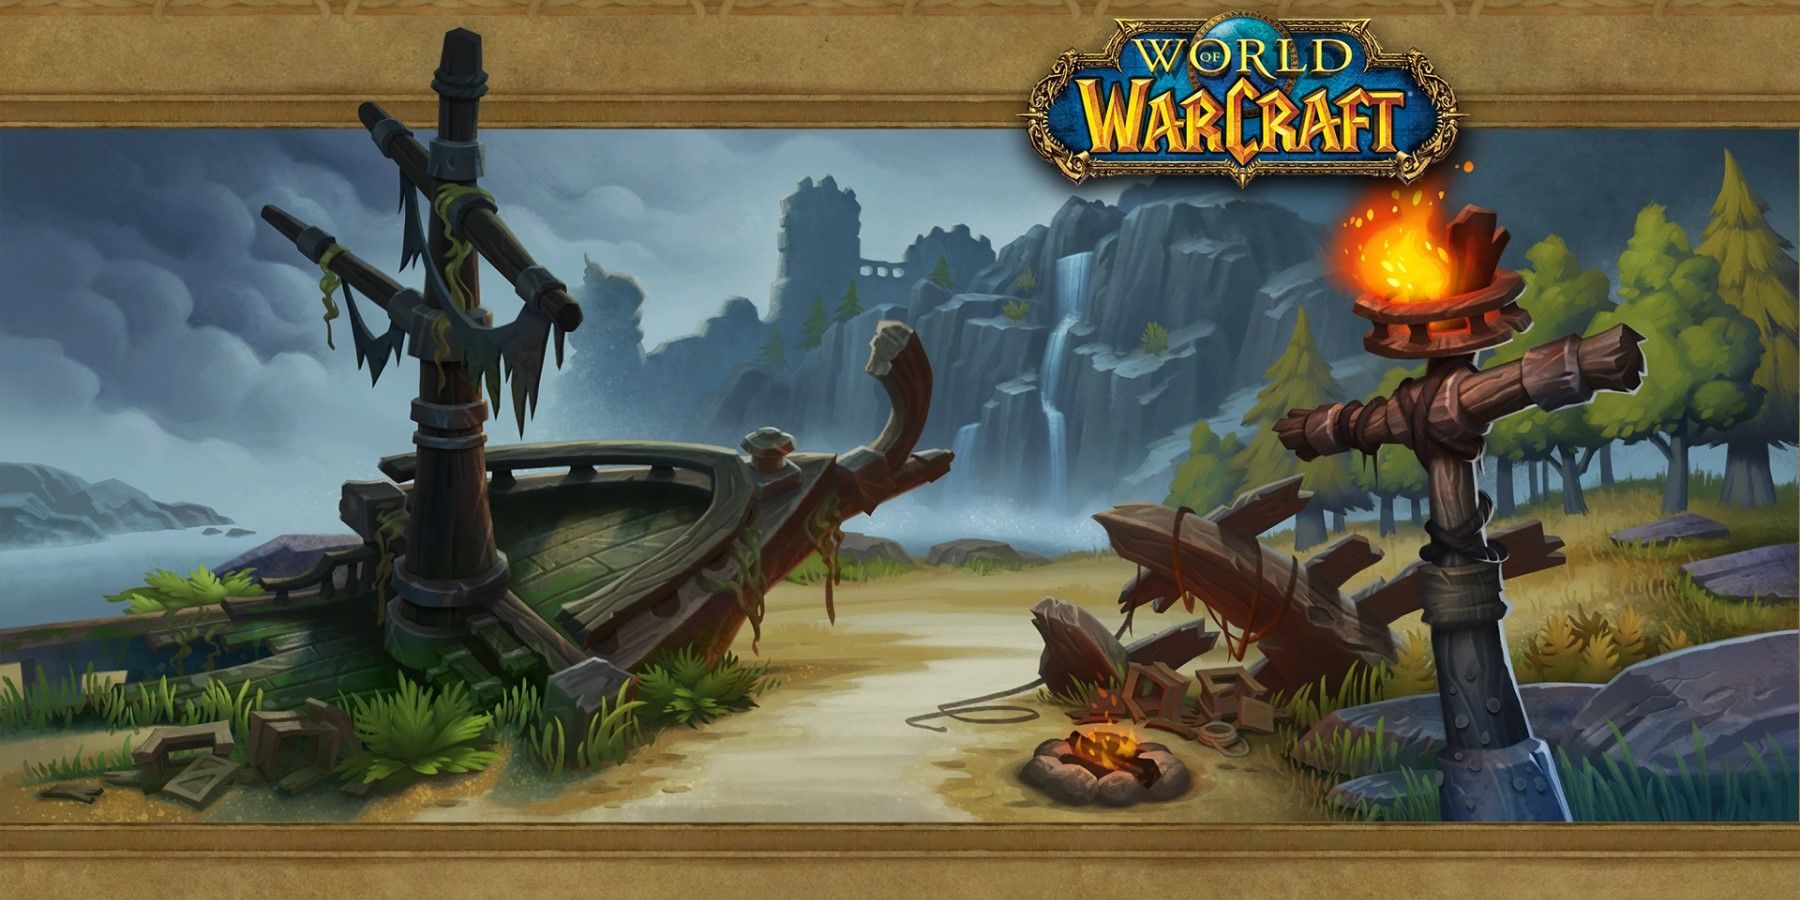 How would you feel if WoW expansions no longer included new levels?